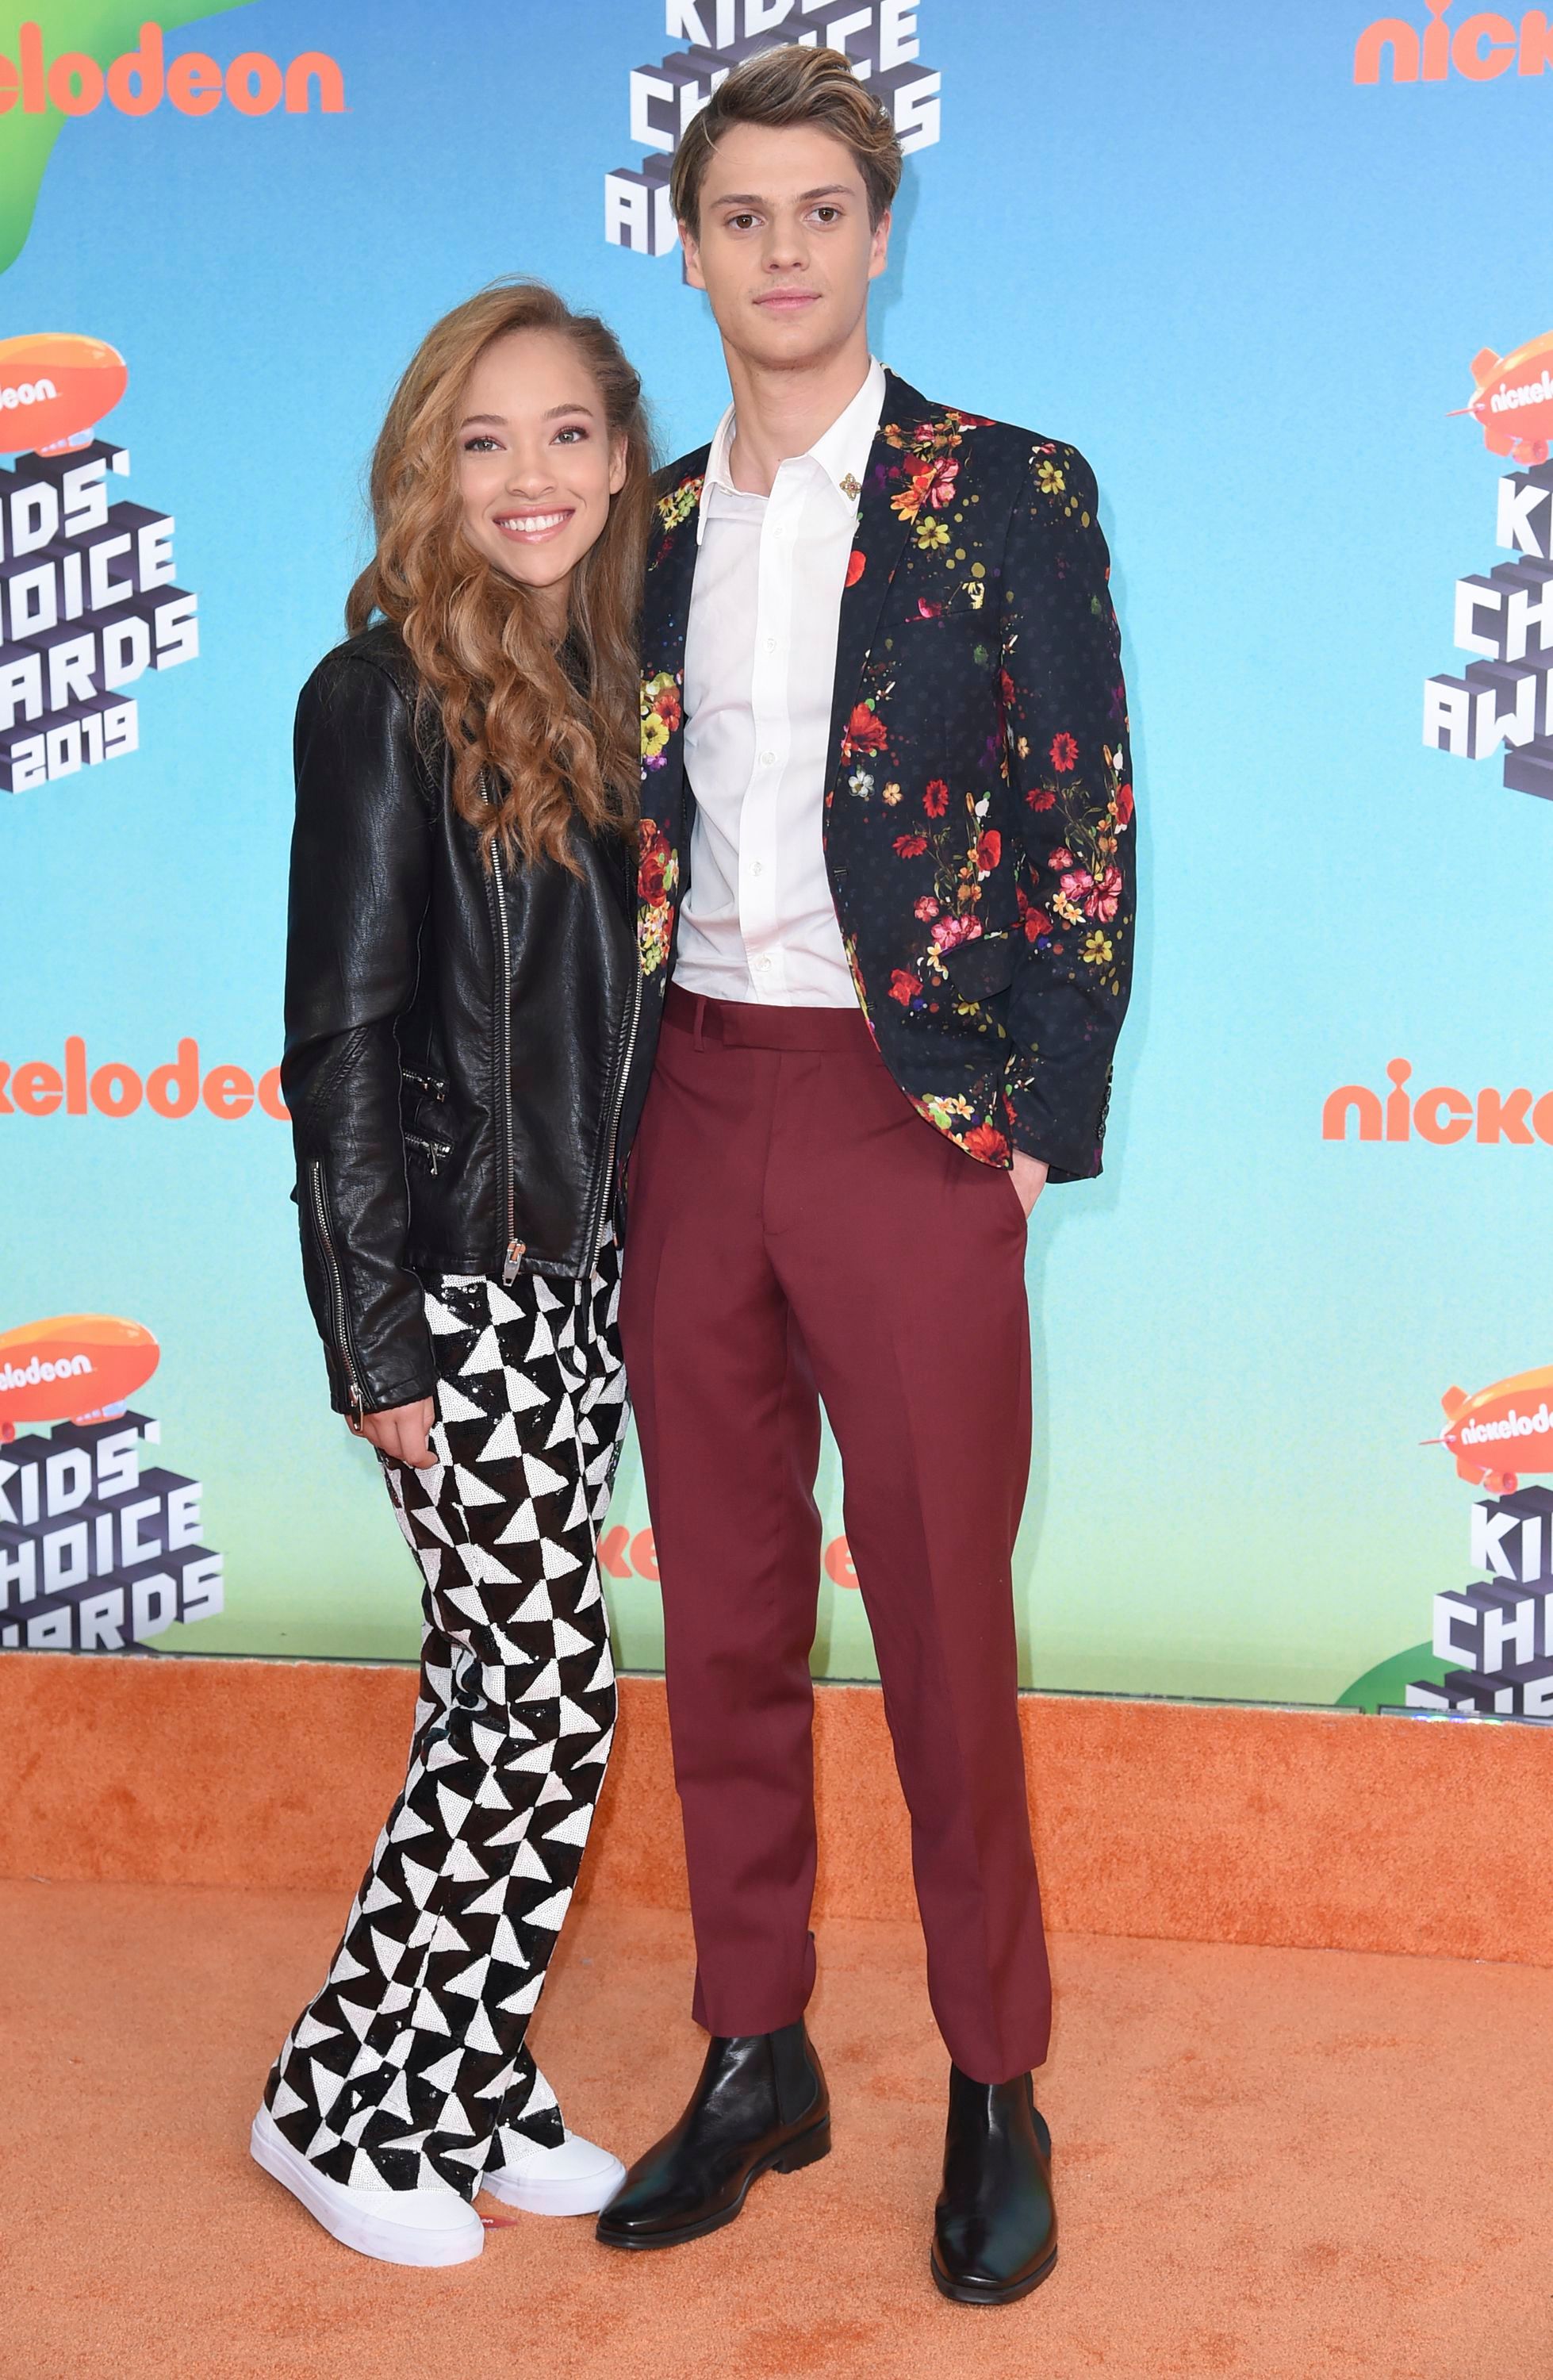 Jace Norman's Love Life Past Relationships, Rumored Girlfriends